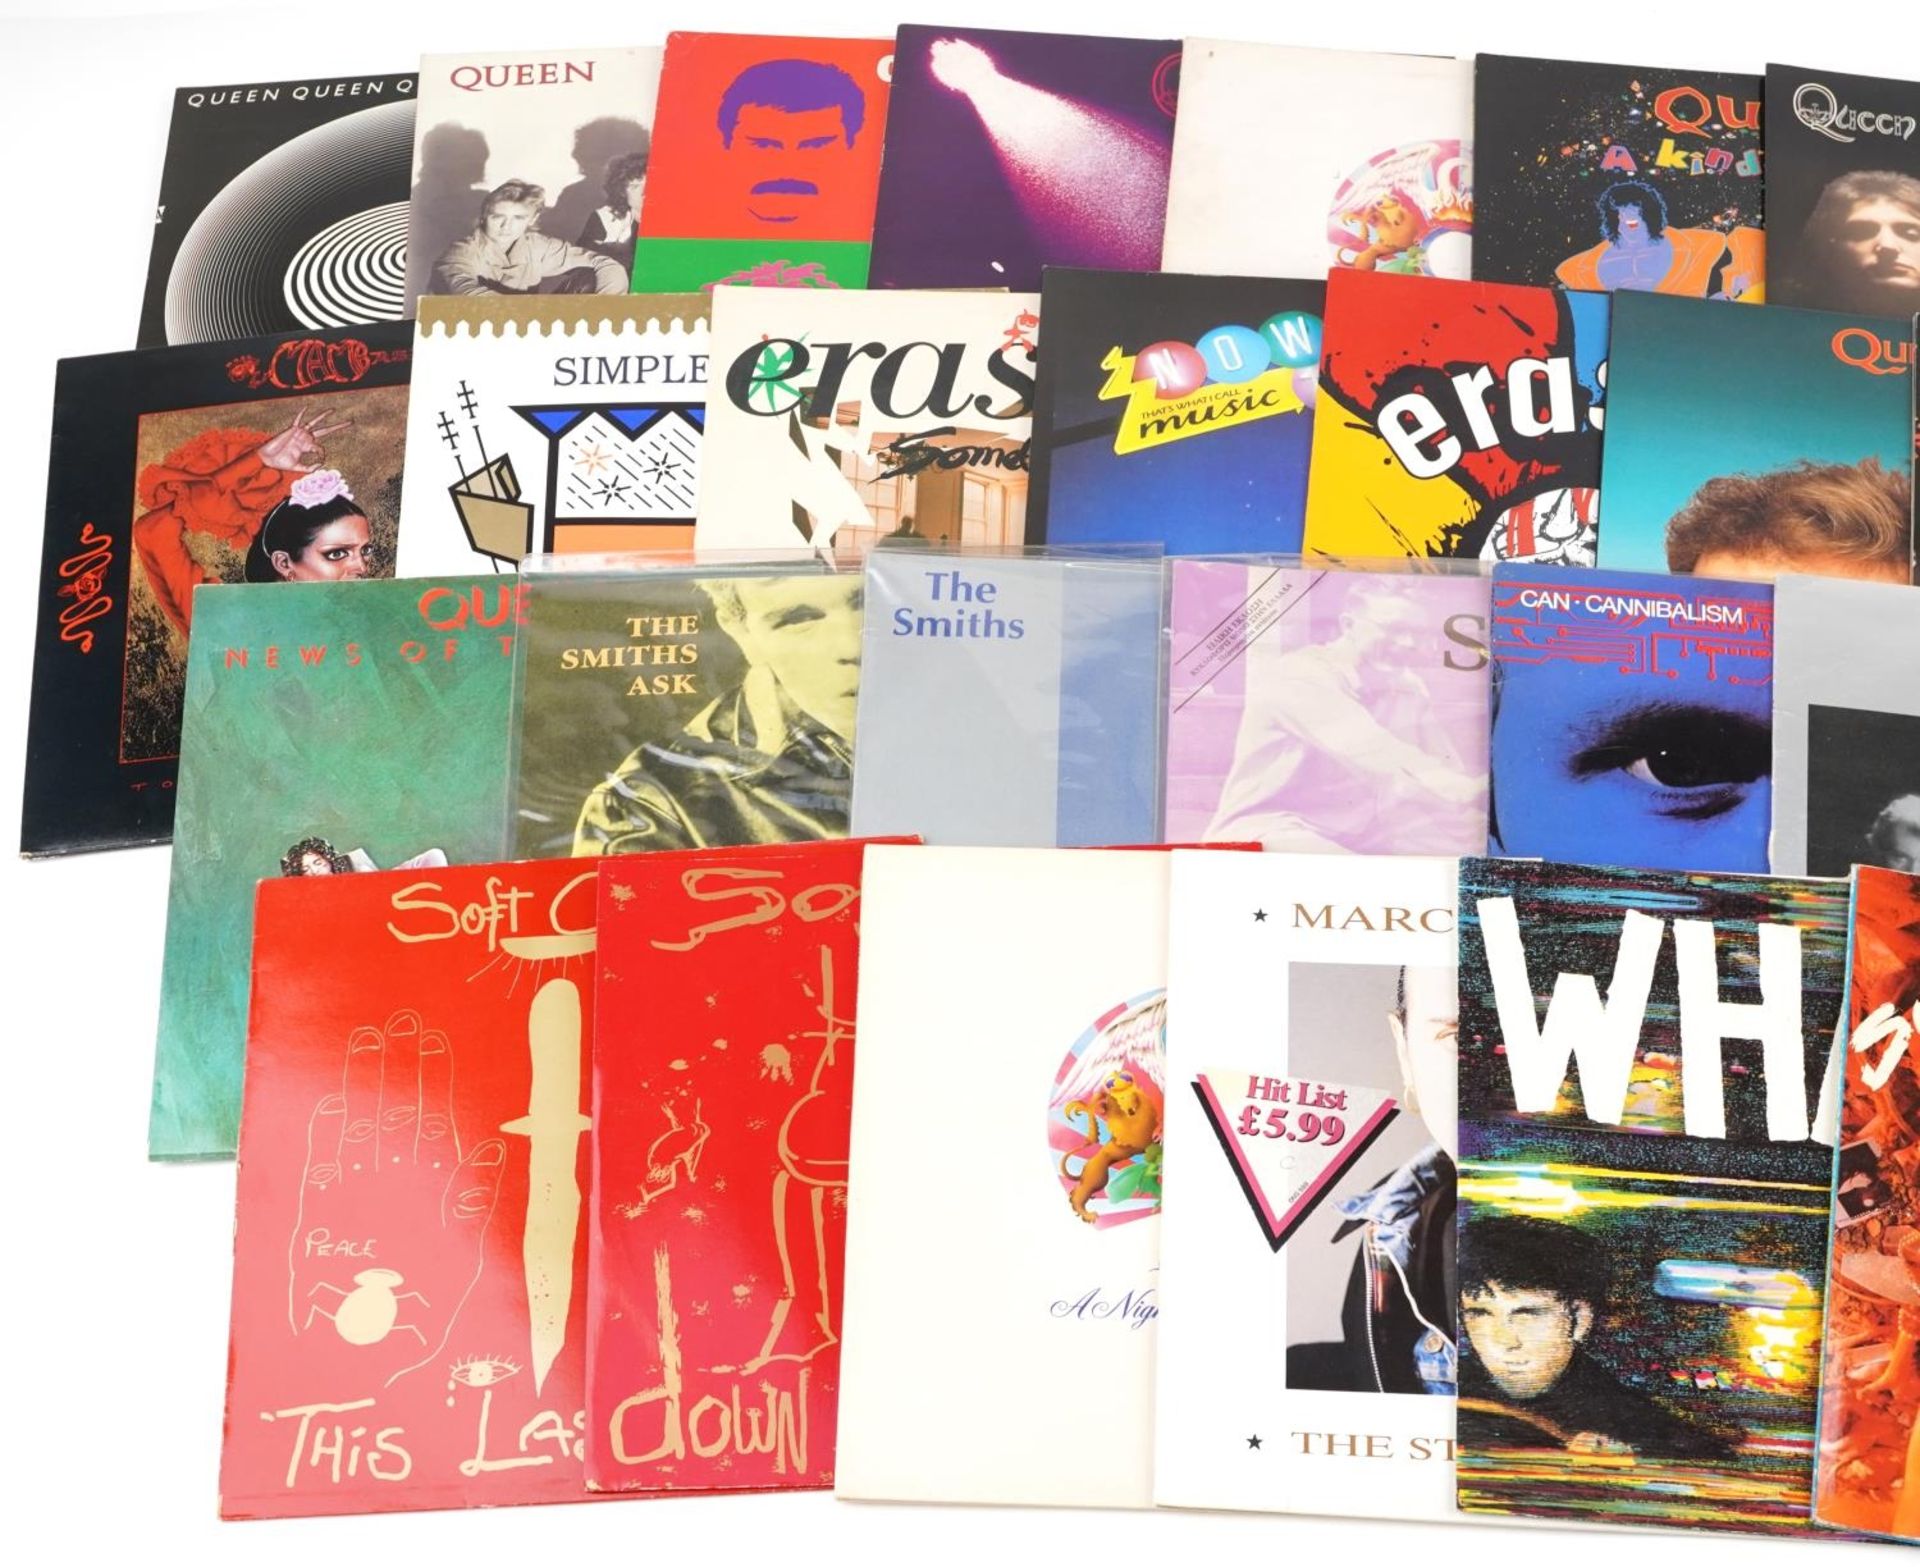 Vinyl LP records including The Smiths, Simple Minds and Queen : For further information on this - Image 2 of 3